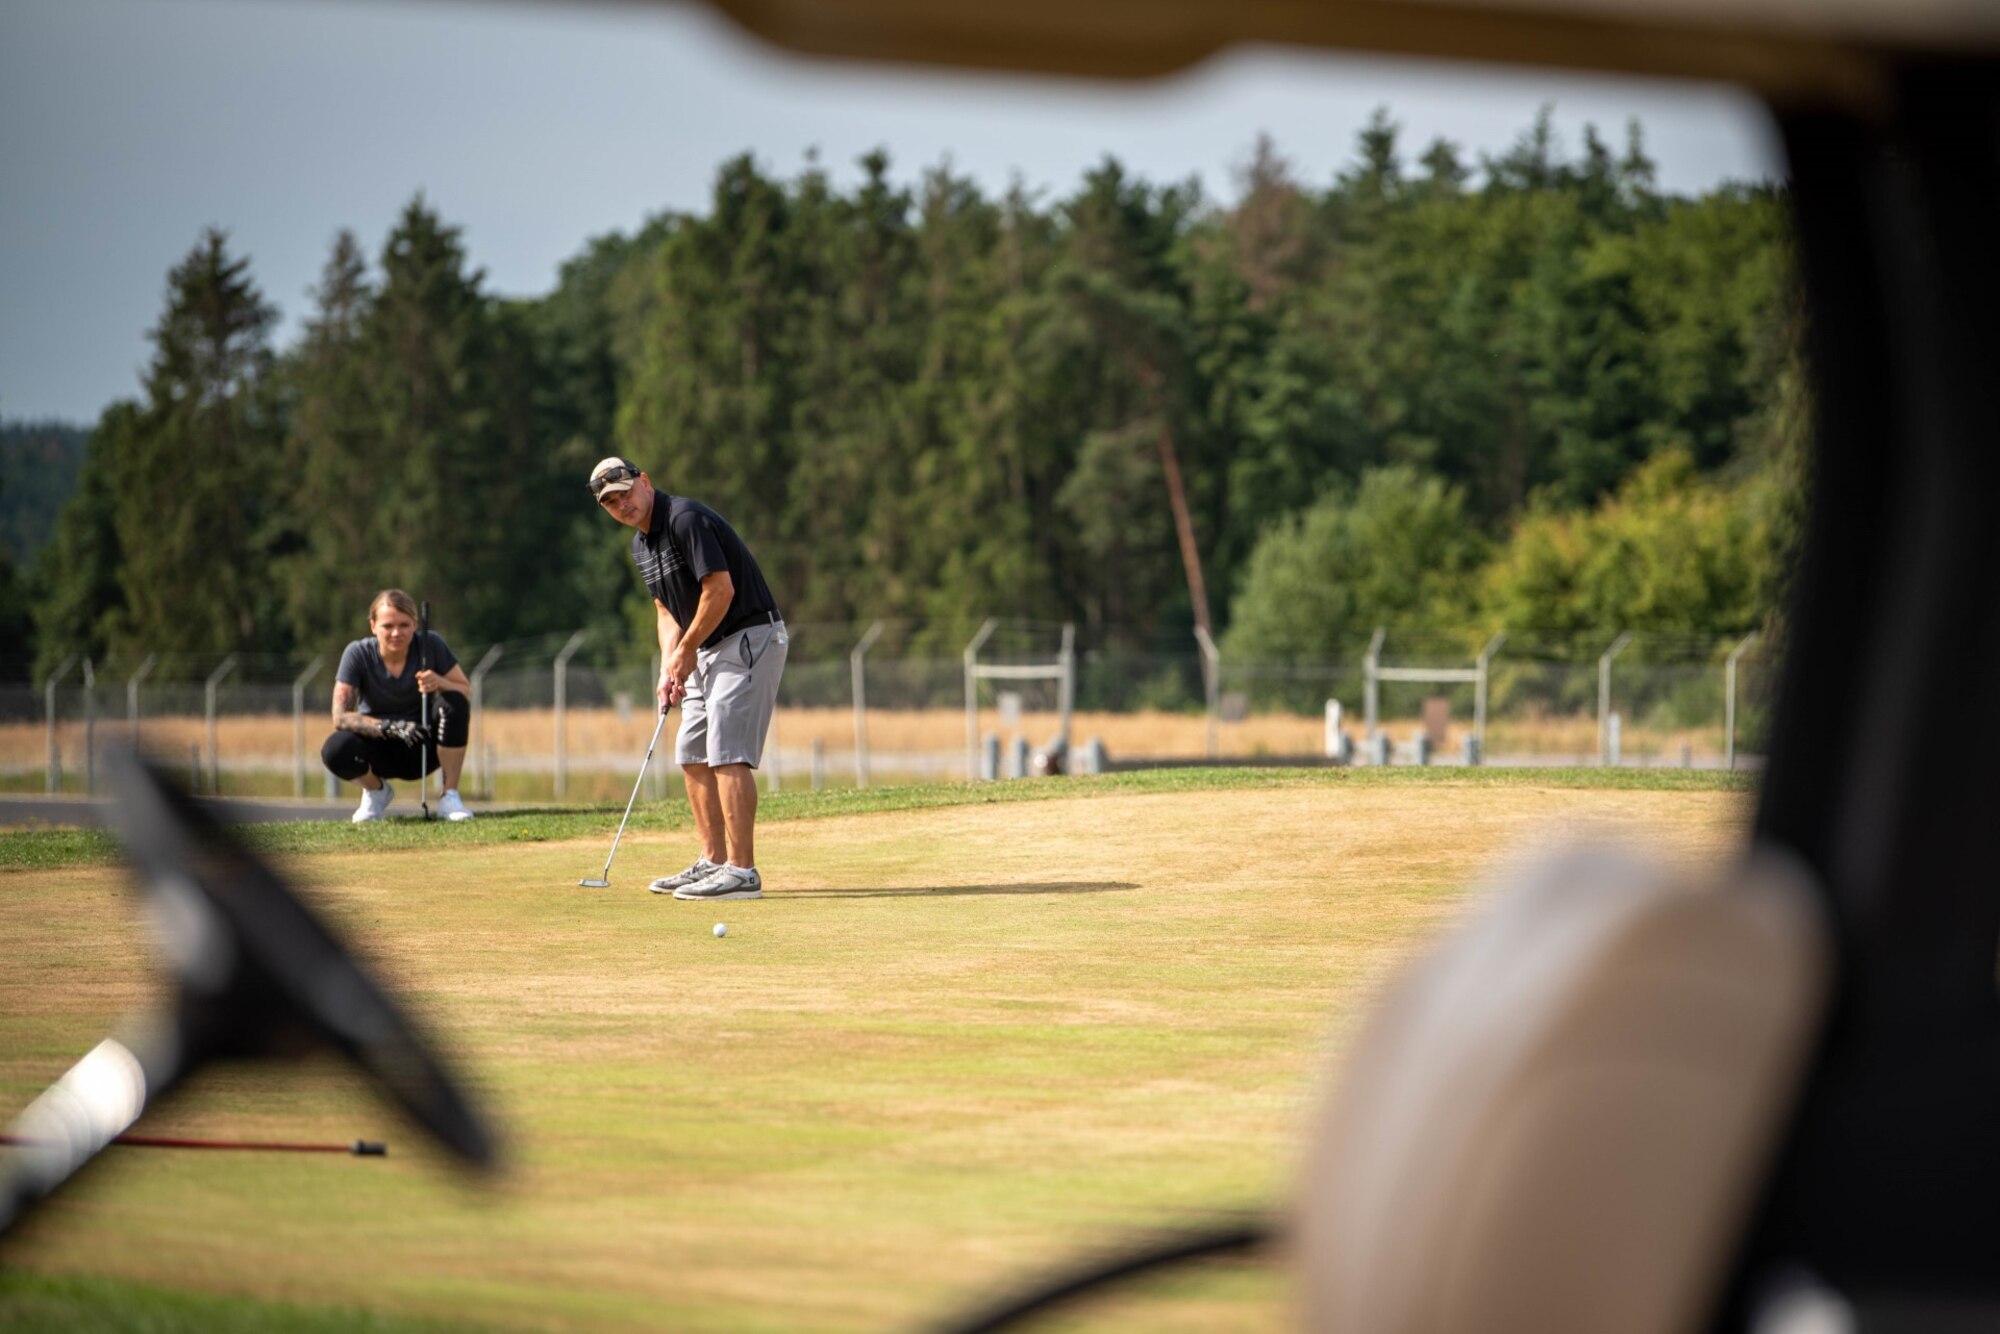 U.S. Air Force Master Sgt. Brian Wingo, 52nd Fighter Wing self-assessment program manager, putts during a golf tournament .